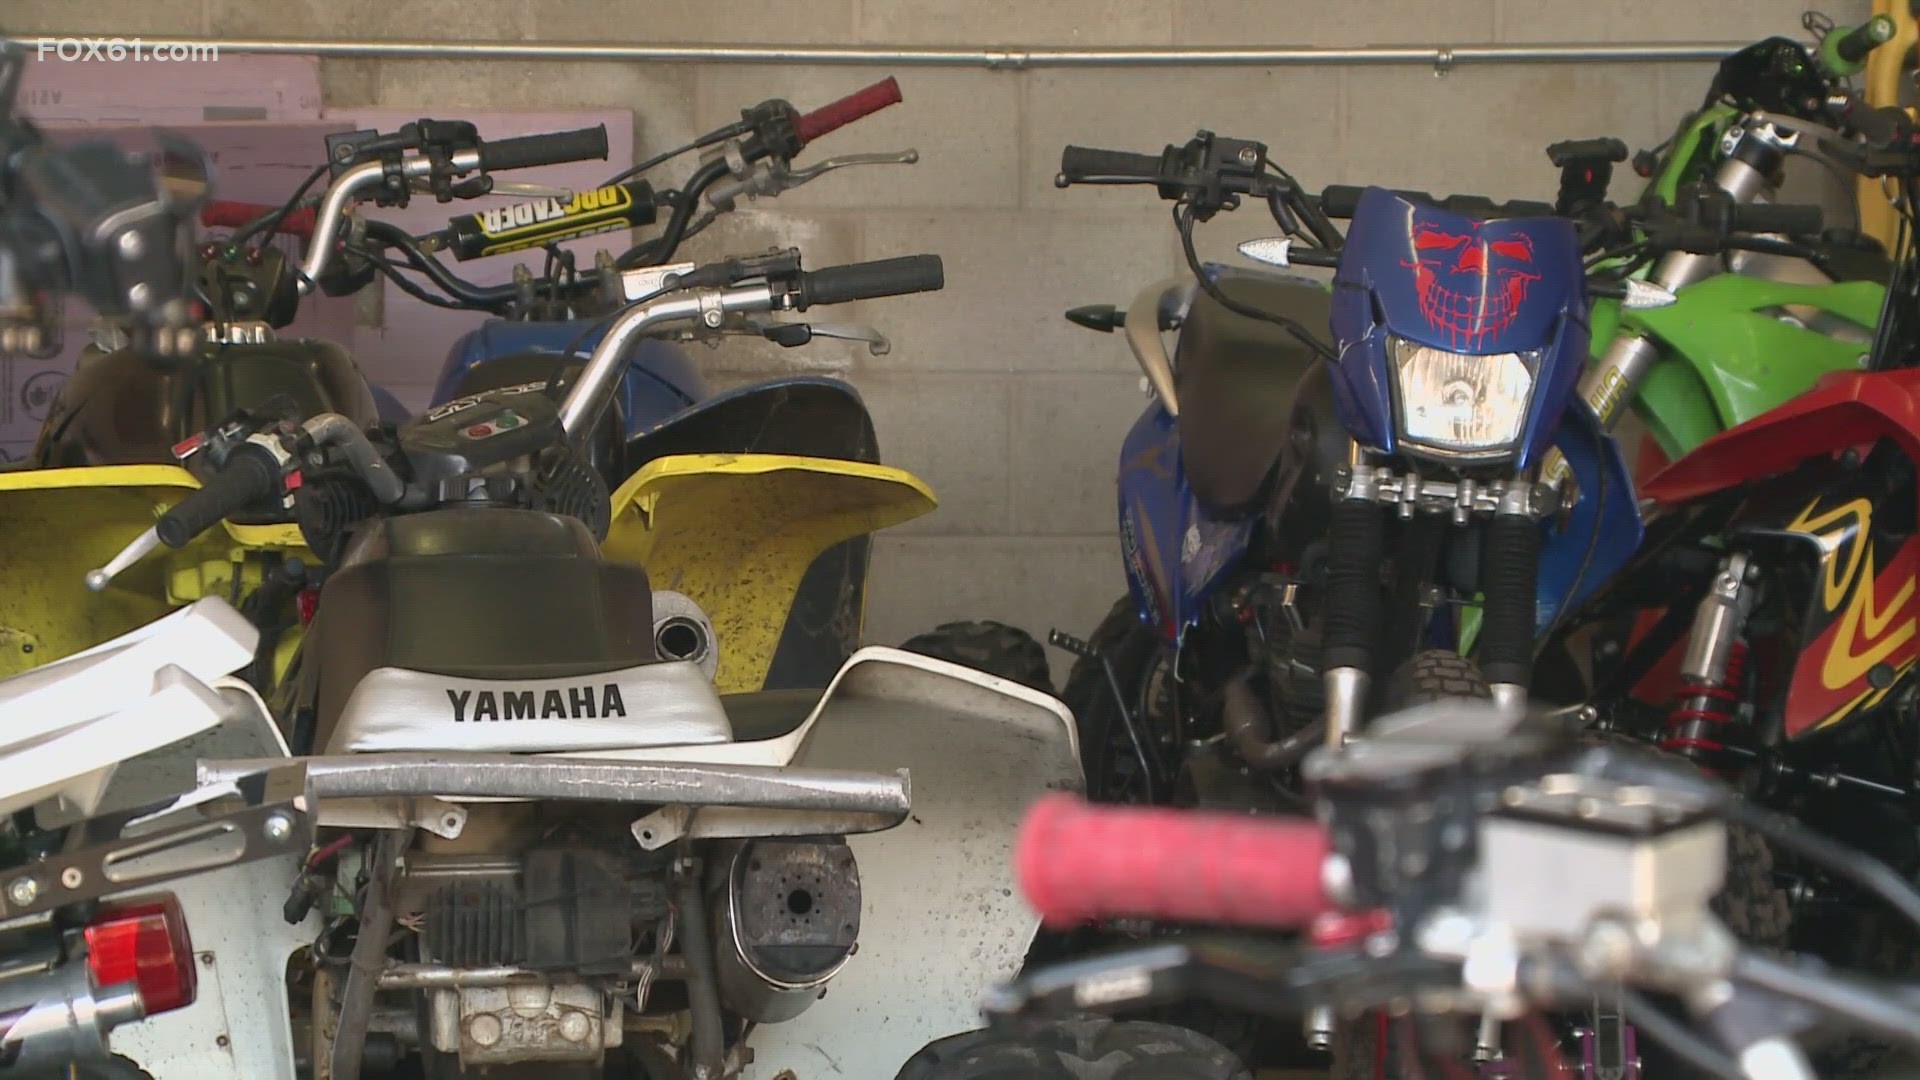 City leaders want the state to crackdown on the rise of dangerous street takeovers and allow municipalities to destroy seized dirt bikes and ATVs.